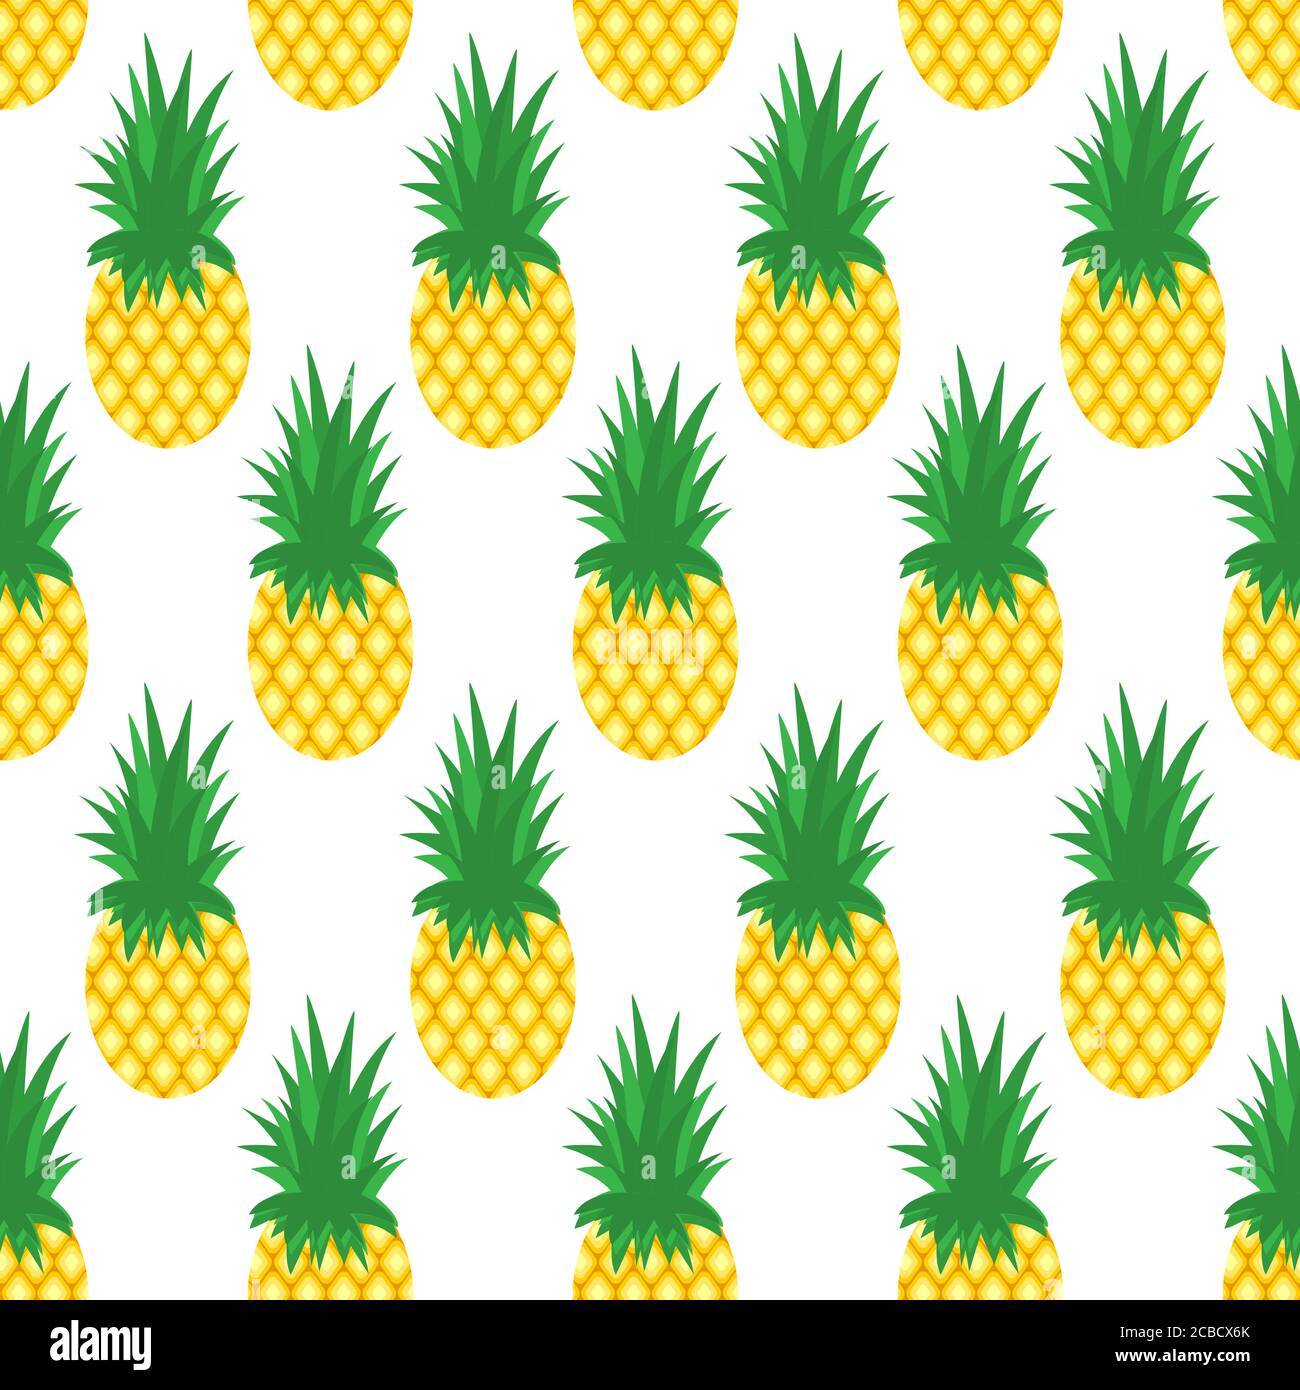 Pineapple background. Seamless pattern with pineapples Vector illustration. Stock Vector